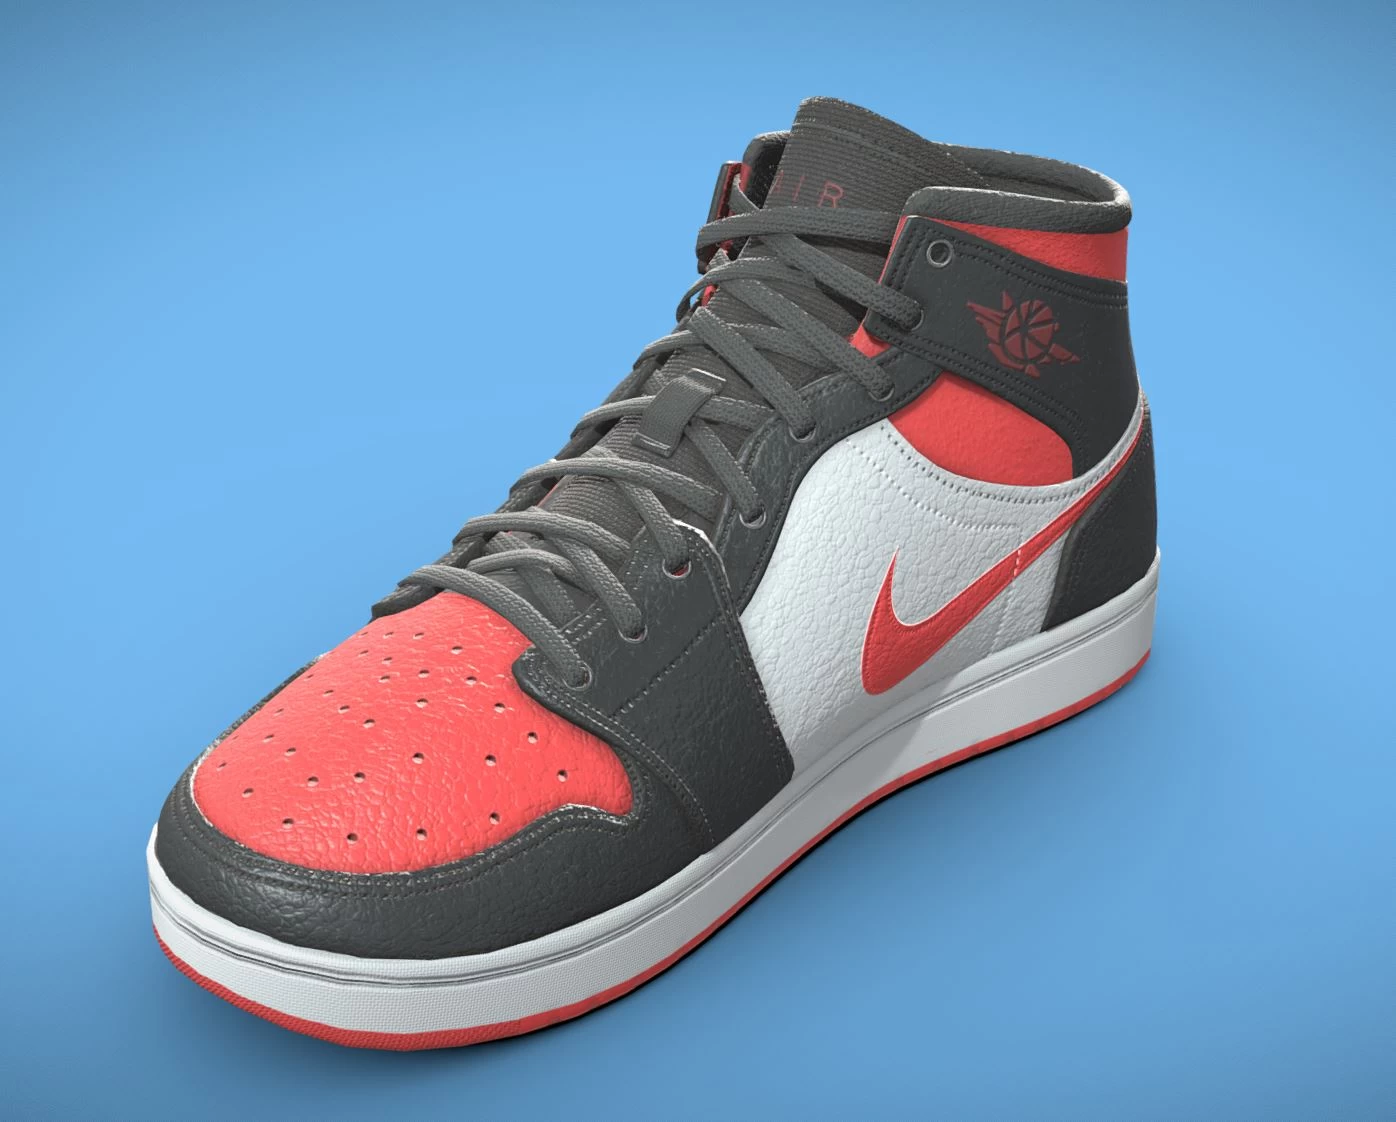 Nike Air Shoe Model » VRModels - 3D Models for VR / AR and CG projects